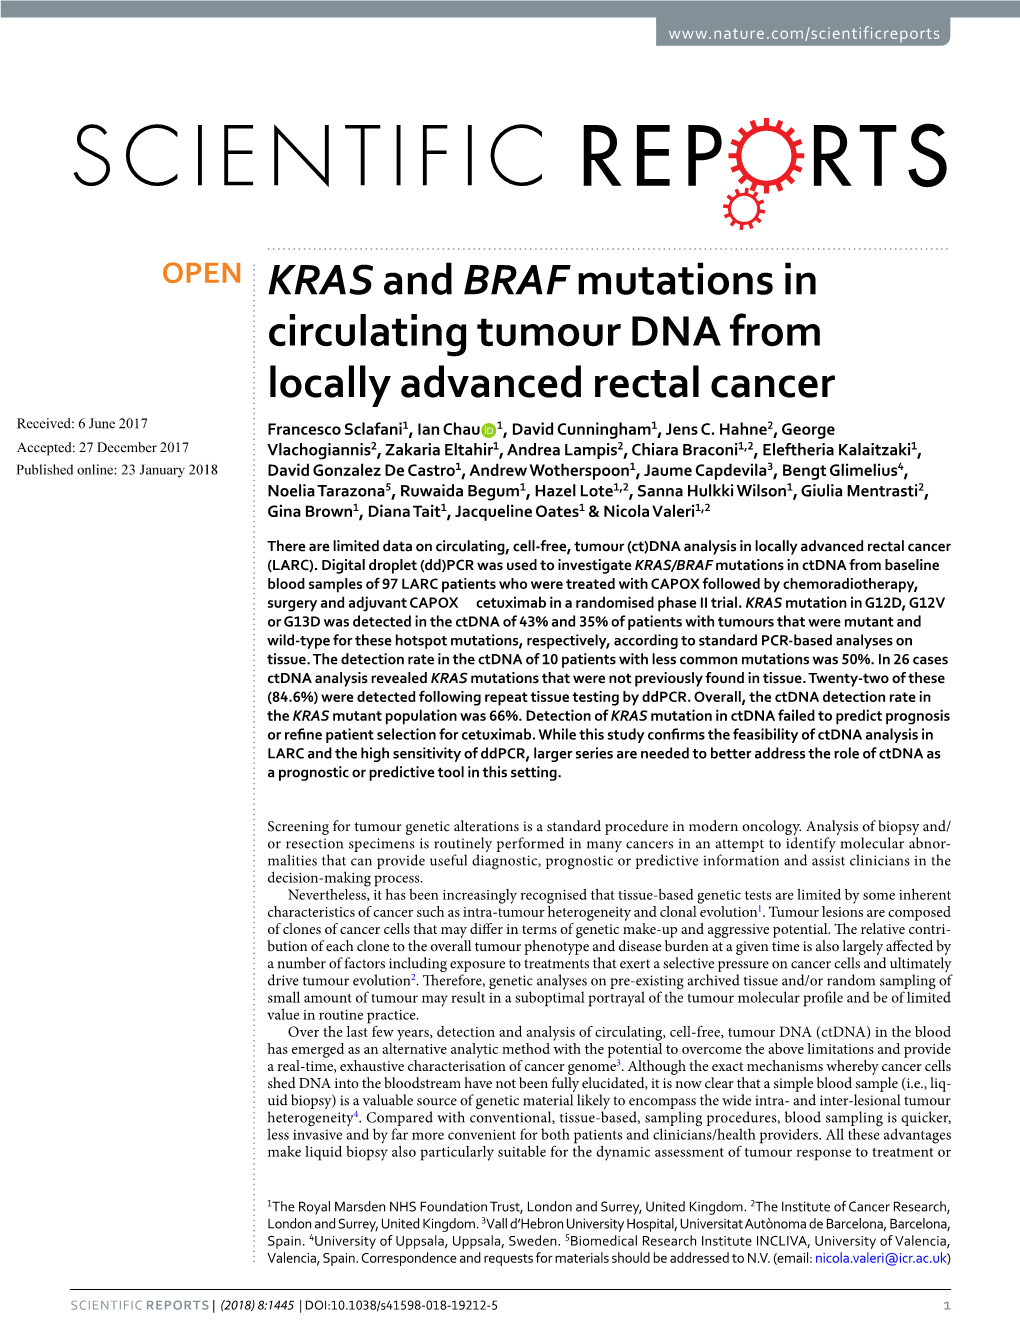 KRAS and BRAF Mutations in Circulating Tumour DNA from Locally Advanced Rectal Cancer Received: 6 June 2017 Francesco Sclafani1, Ian Chau 1, David Cunningham1, Jens C